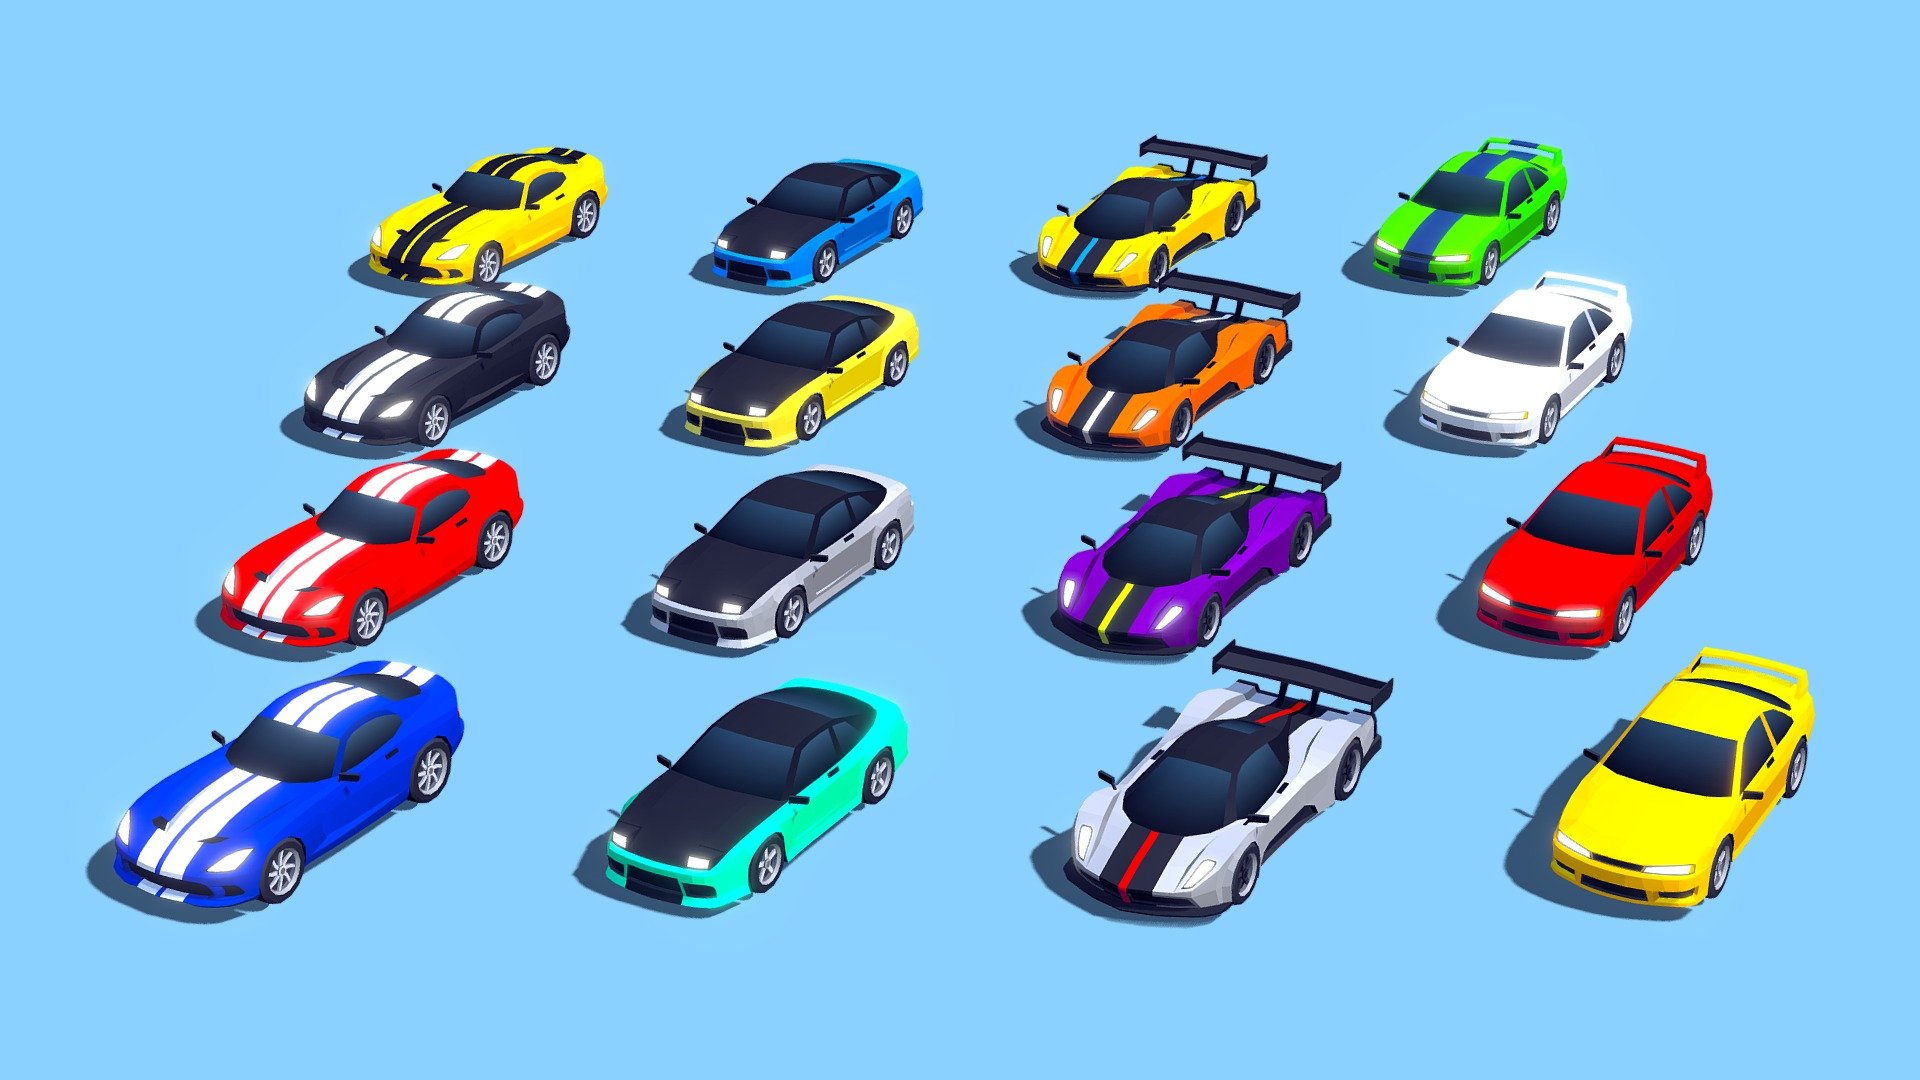 December update (2022.12) of the Low Poly Cars - Mega Pack asset, which is available in the Unity Asset Store 3d model